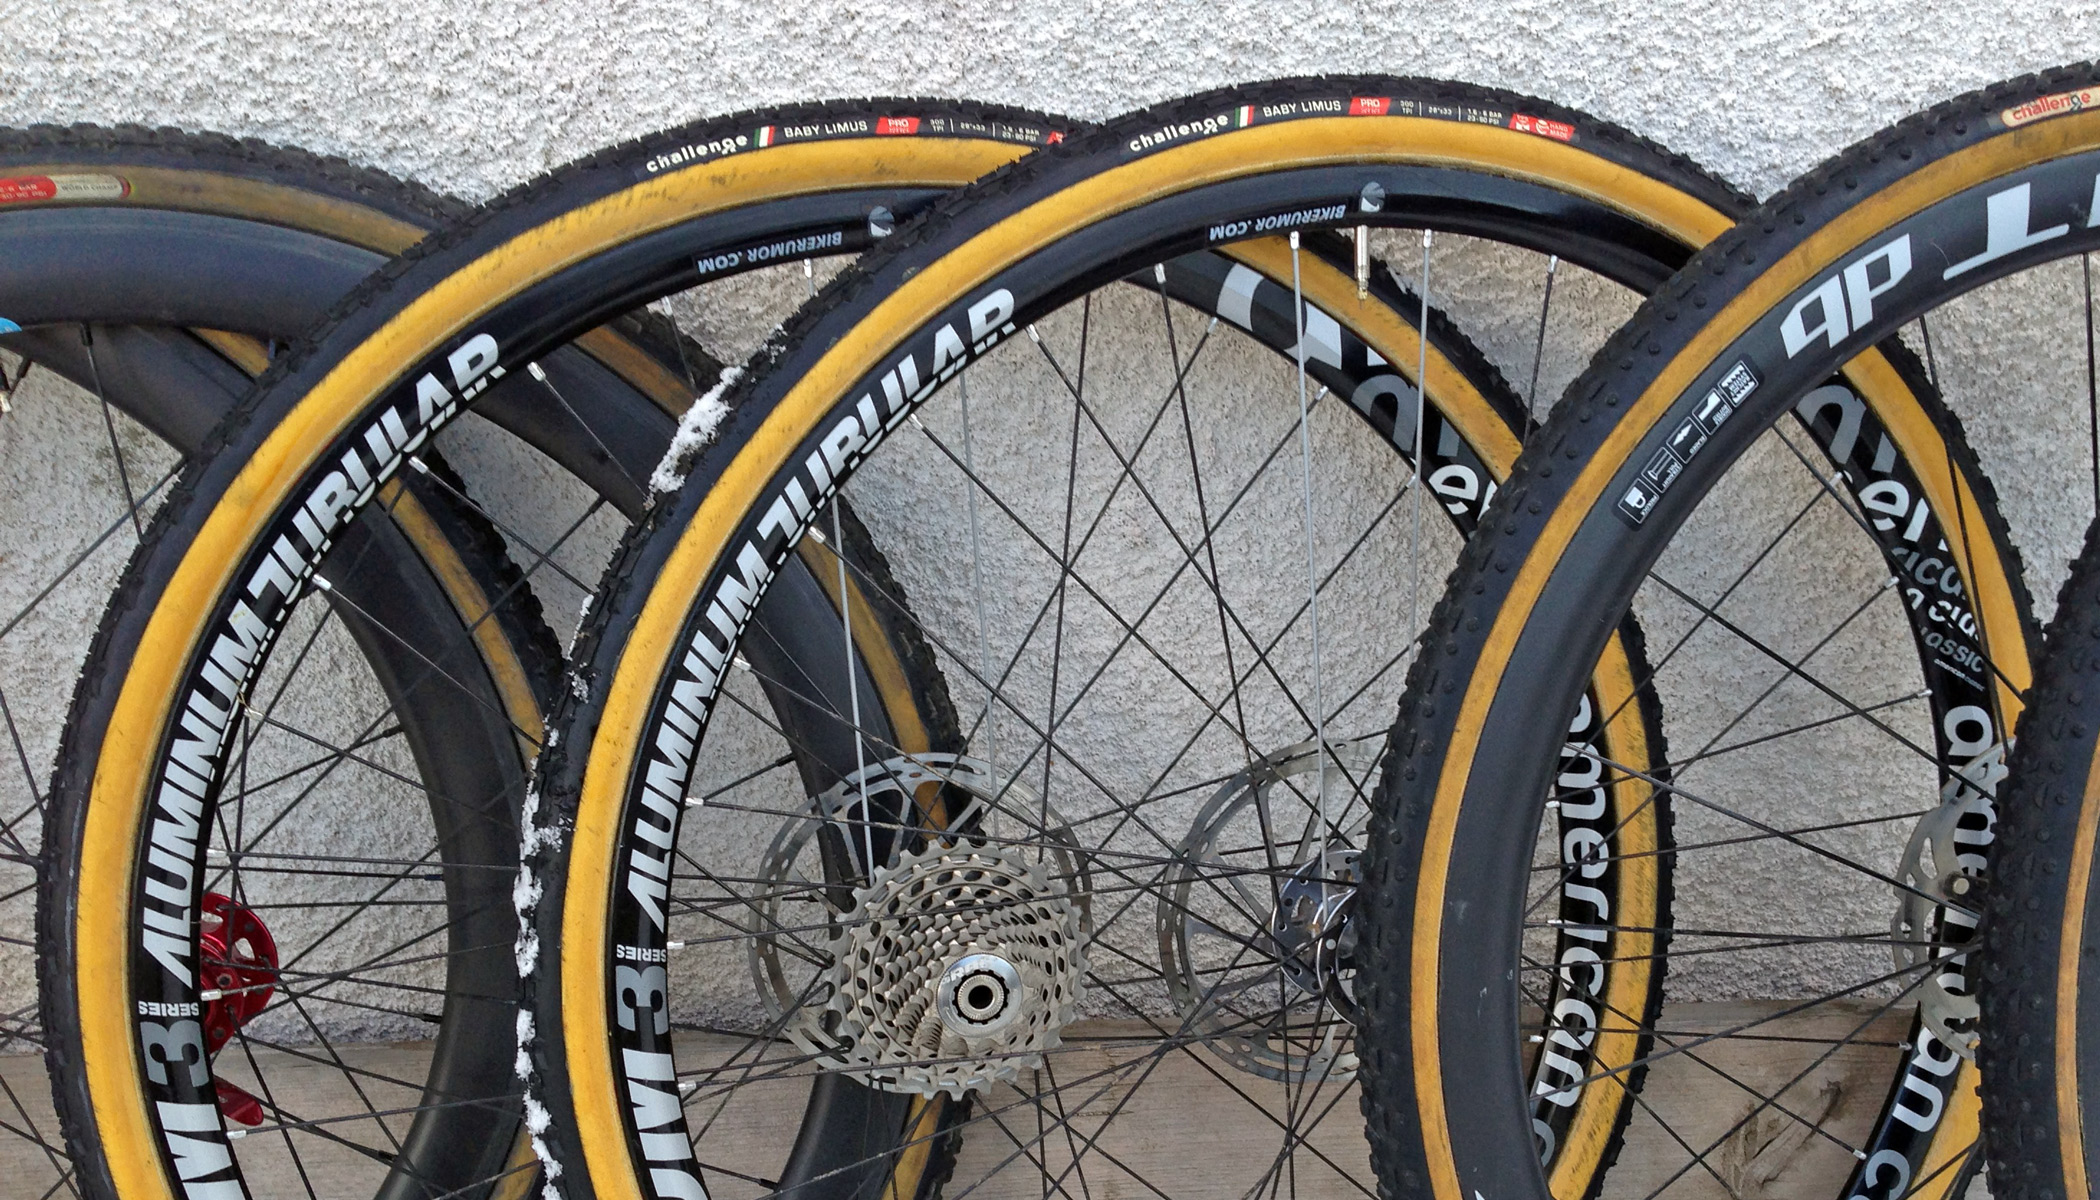 The Wyman Method of picking cyclocross tires – Part 2